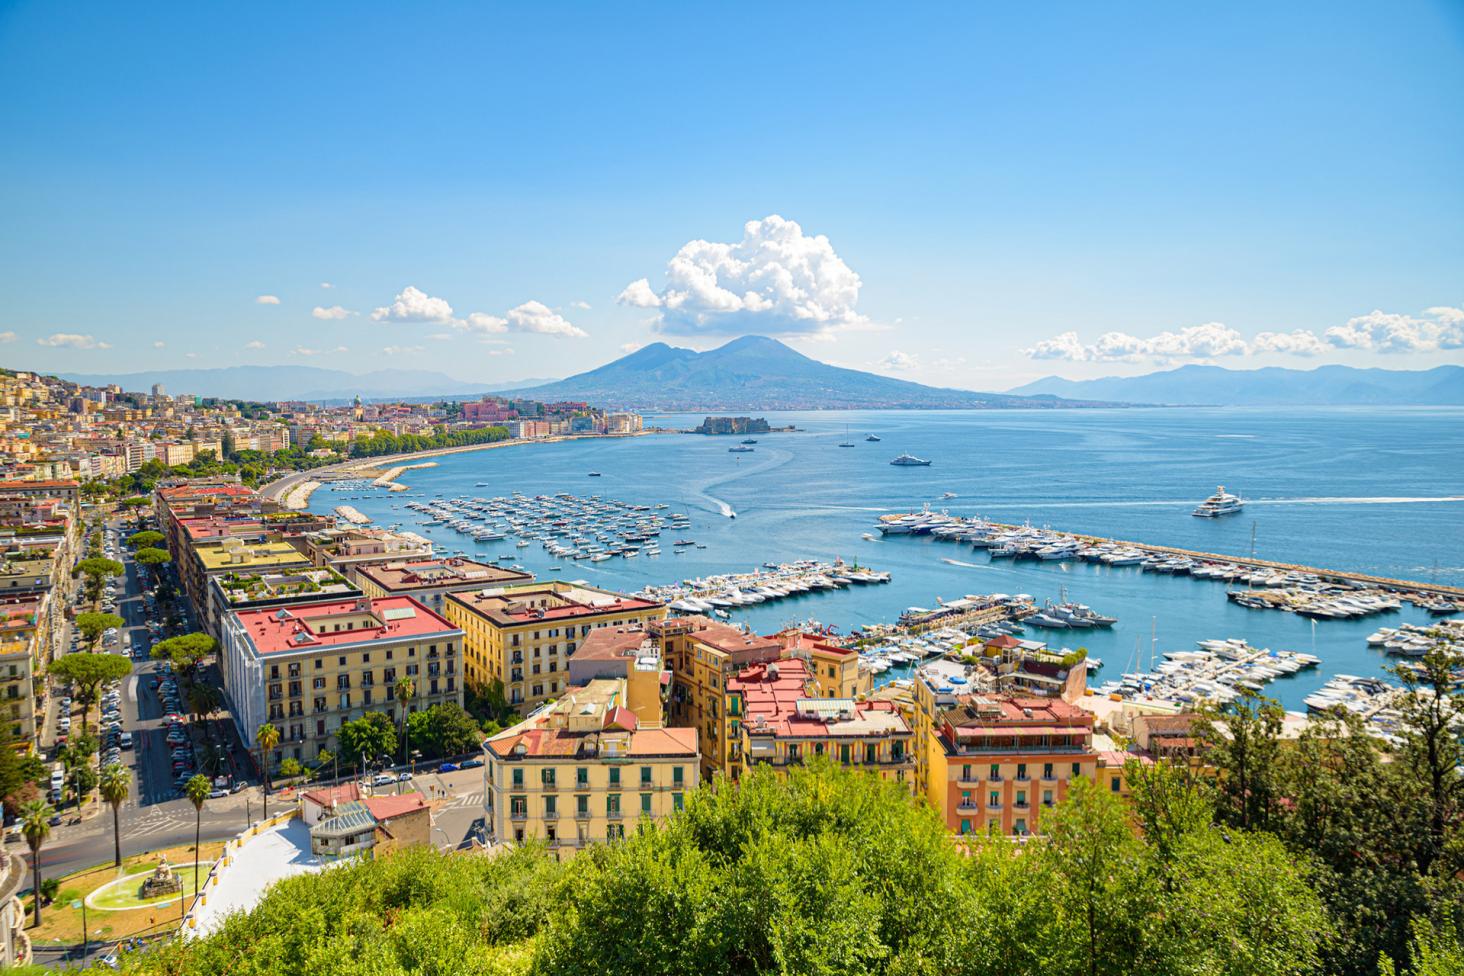 Transfer from Naples with stopovers